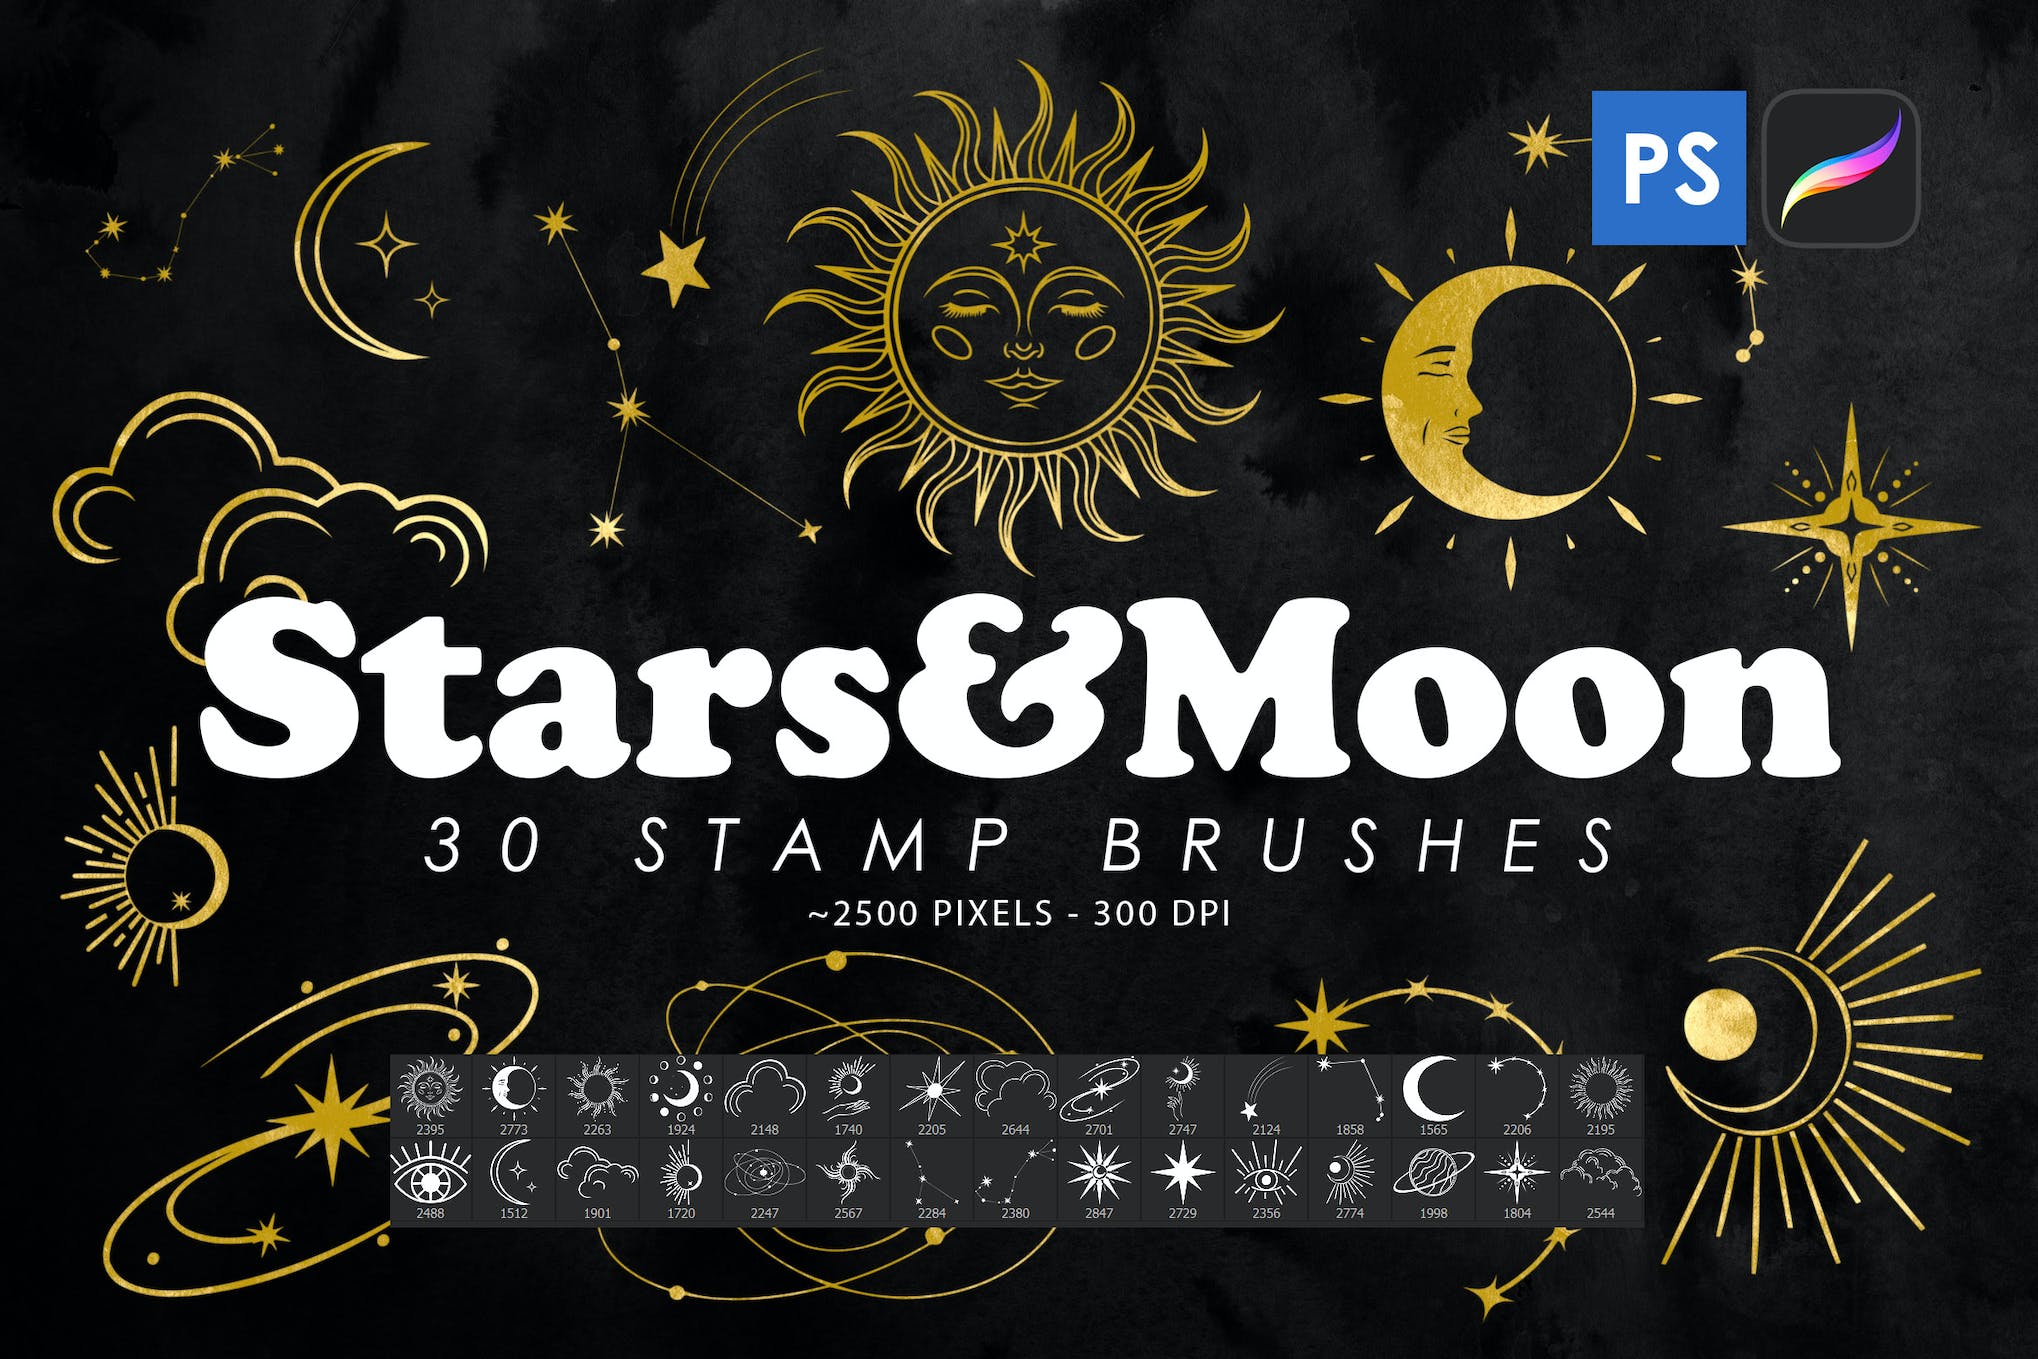 Stars & Moon Stamp Brushes for Photoshop